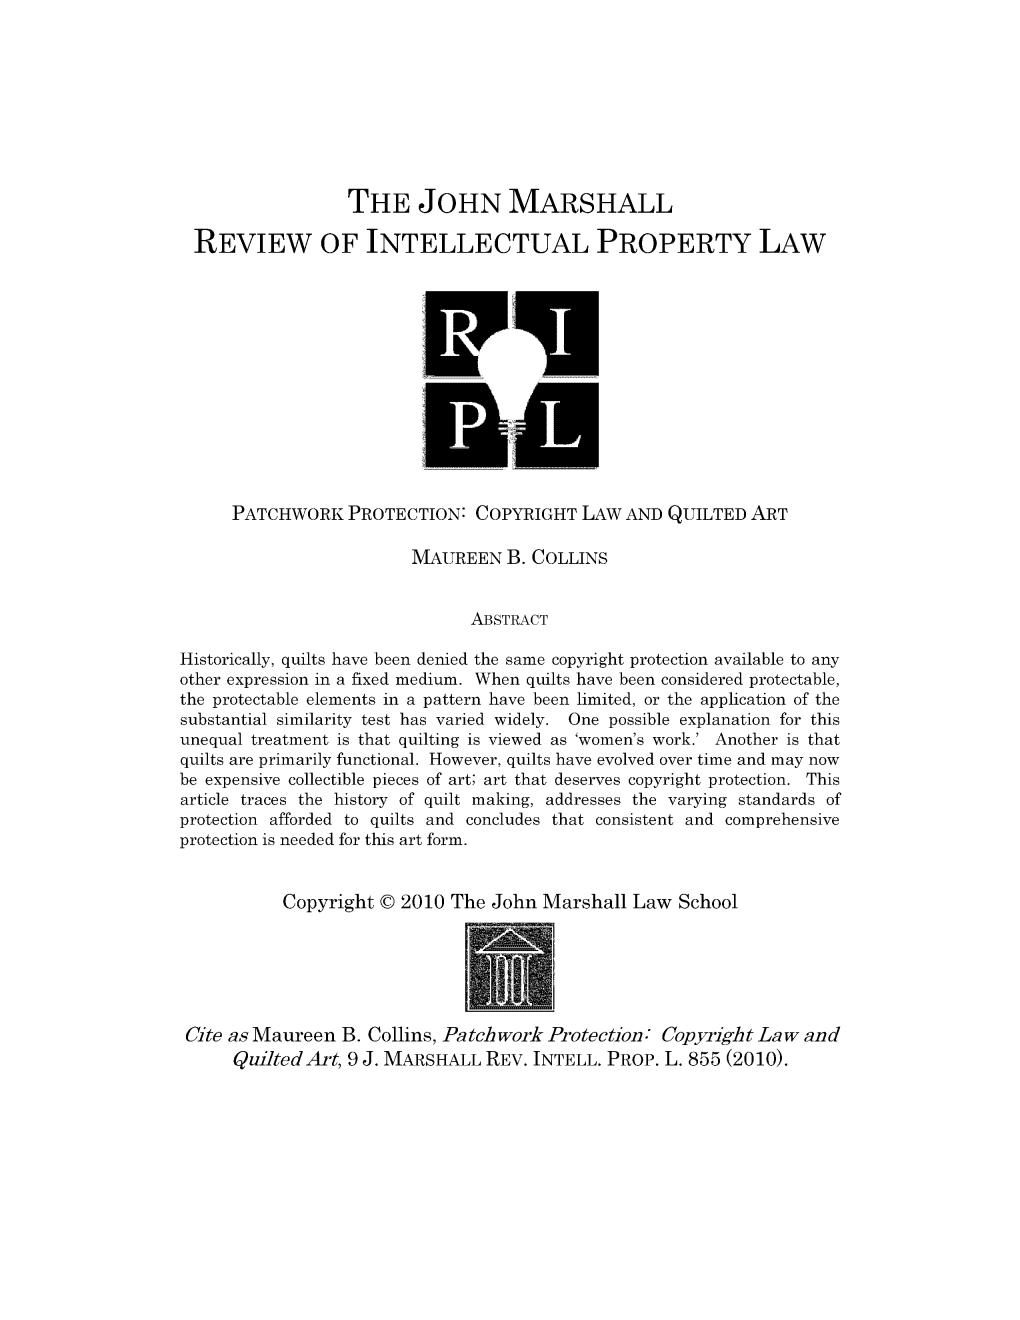 Copyright Law and Quilted Art, 9 J. Marshall Rev. Intell. Prop. L